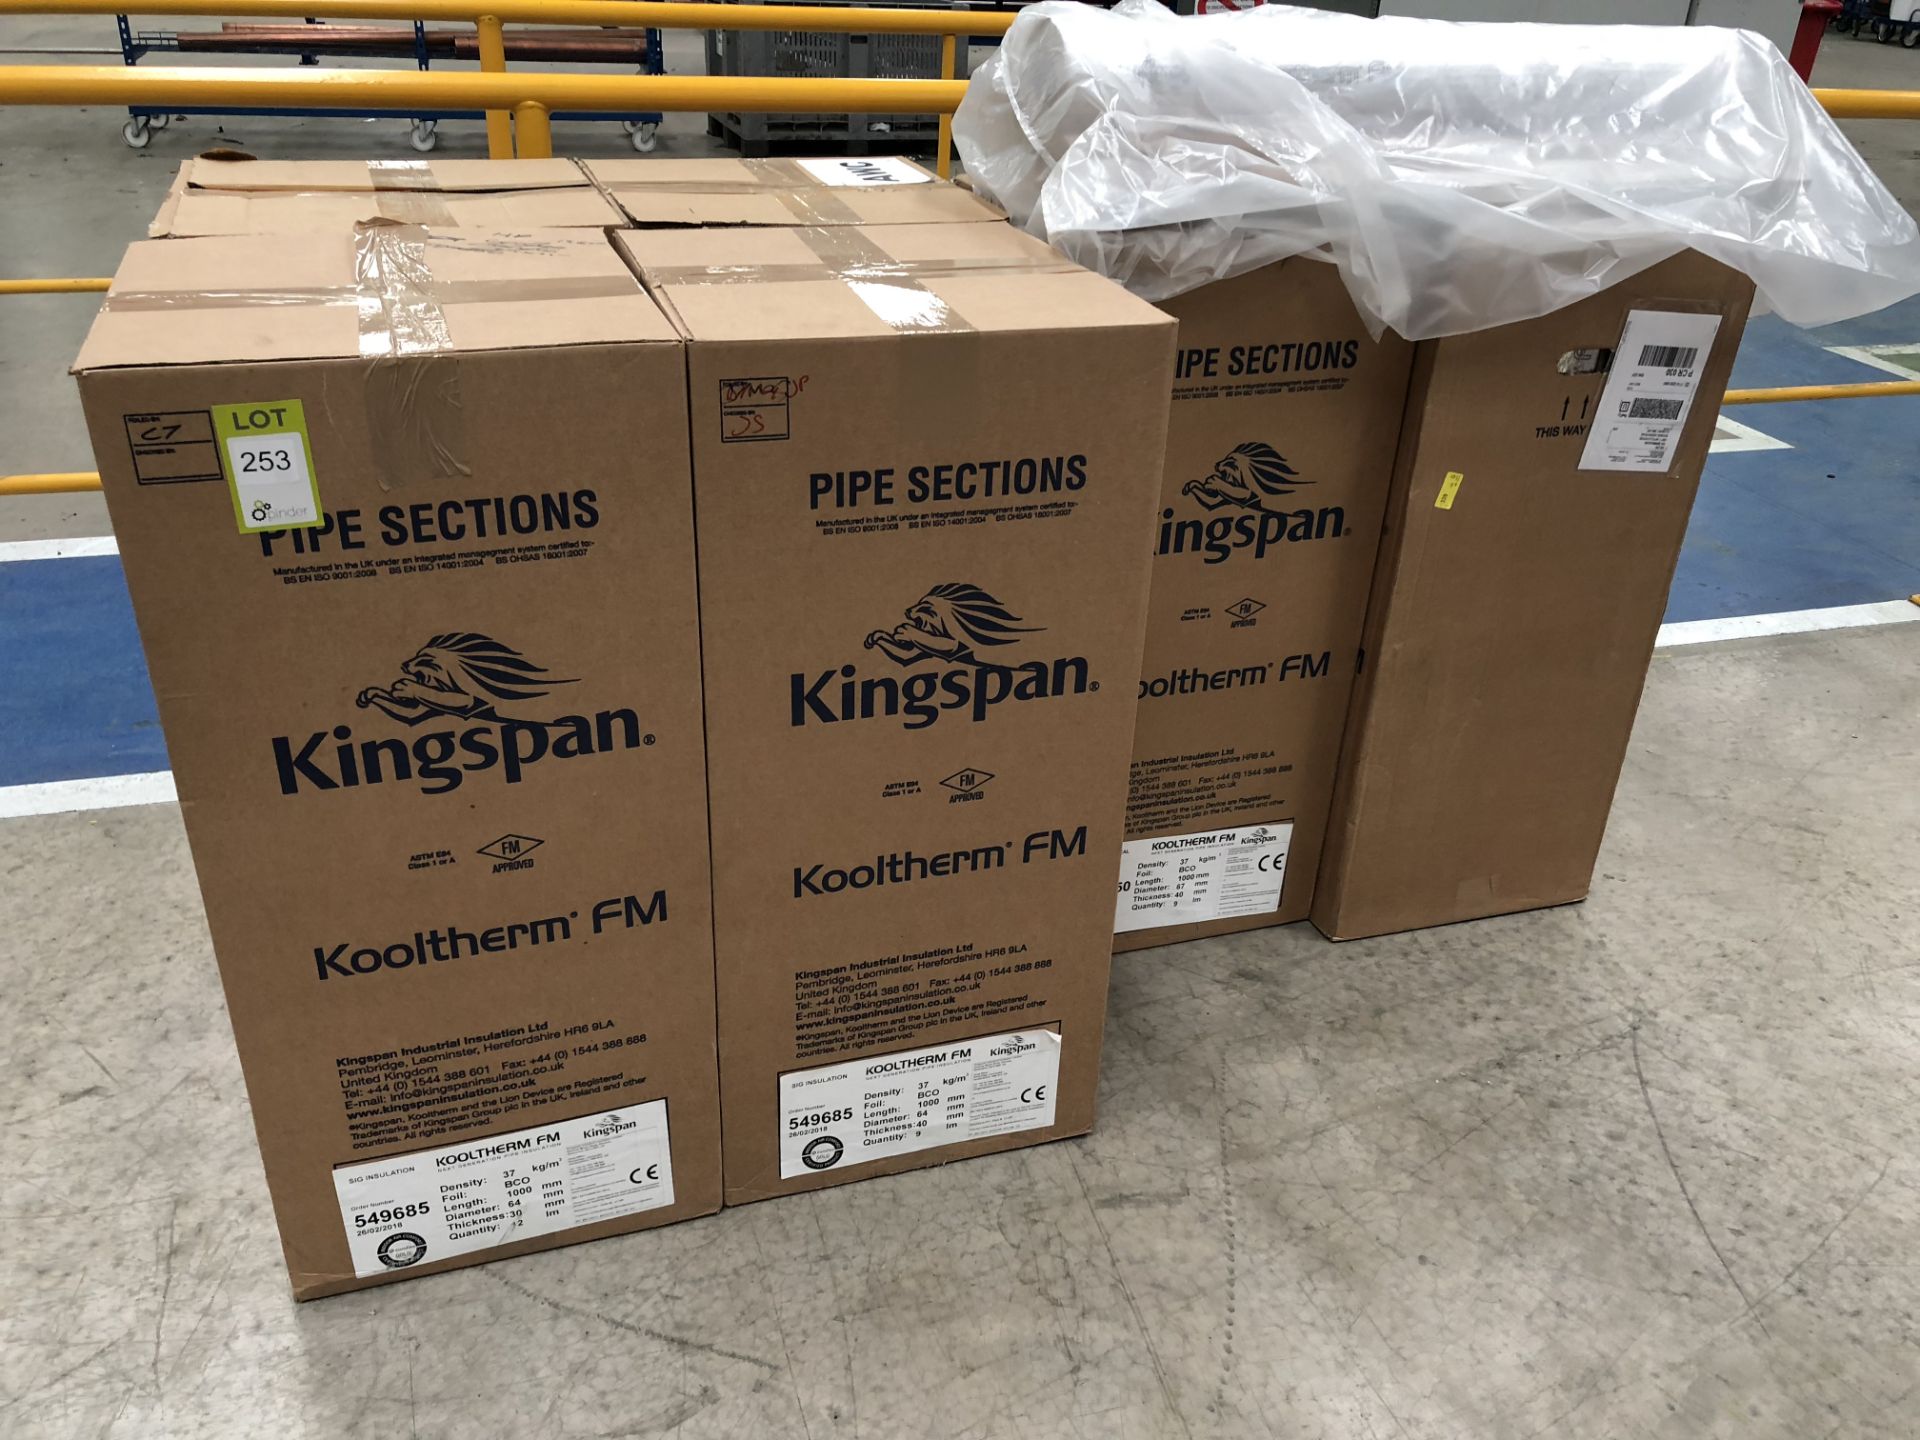 6 boxes Kingspan Kooltherm FM Pipe Insulation (located in Bay 4)